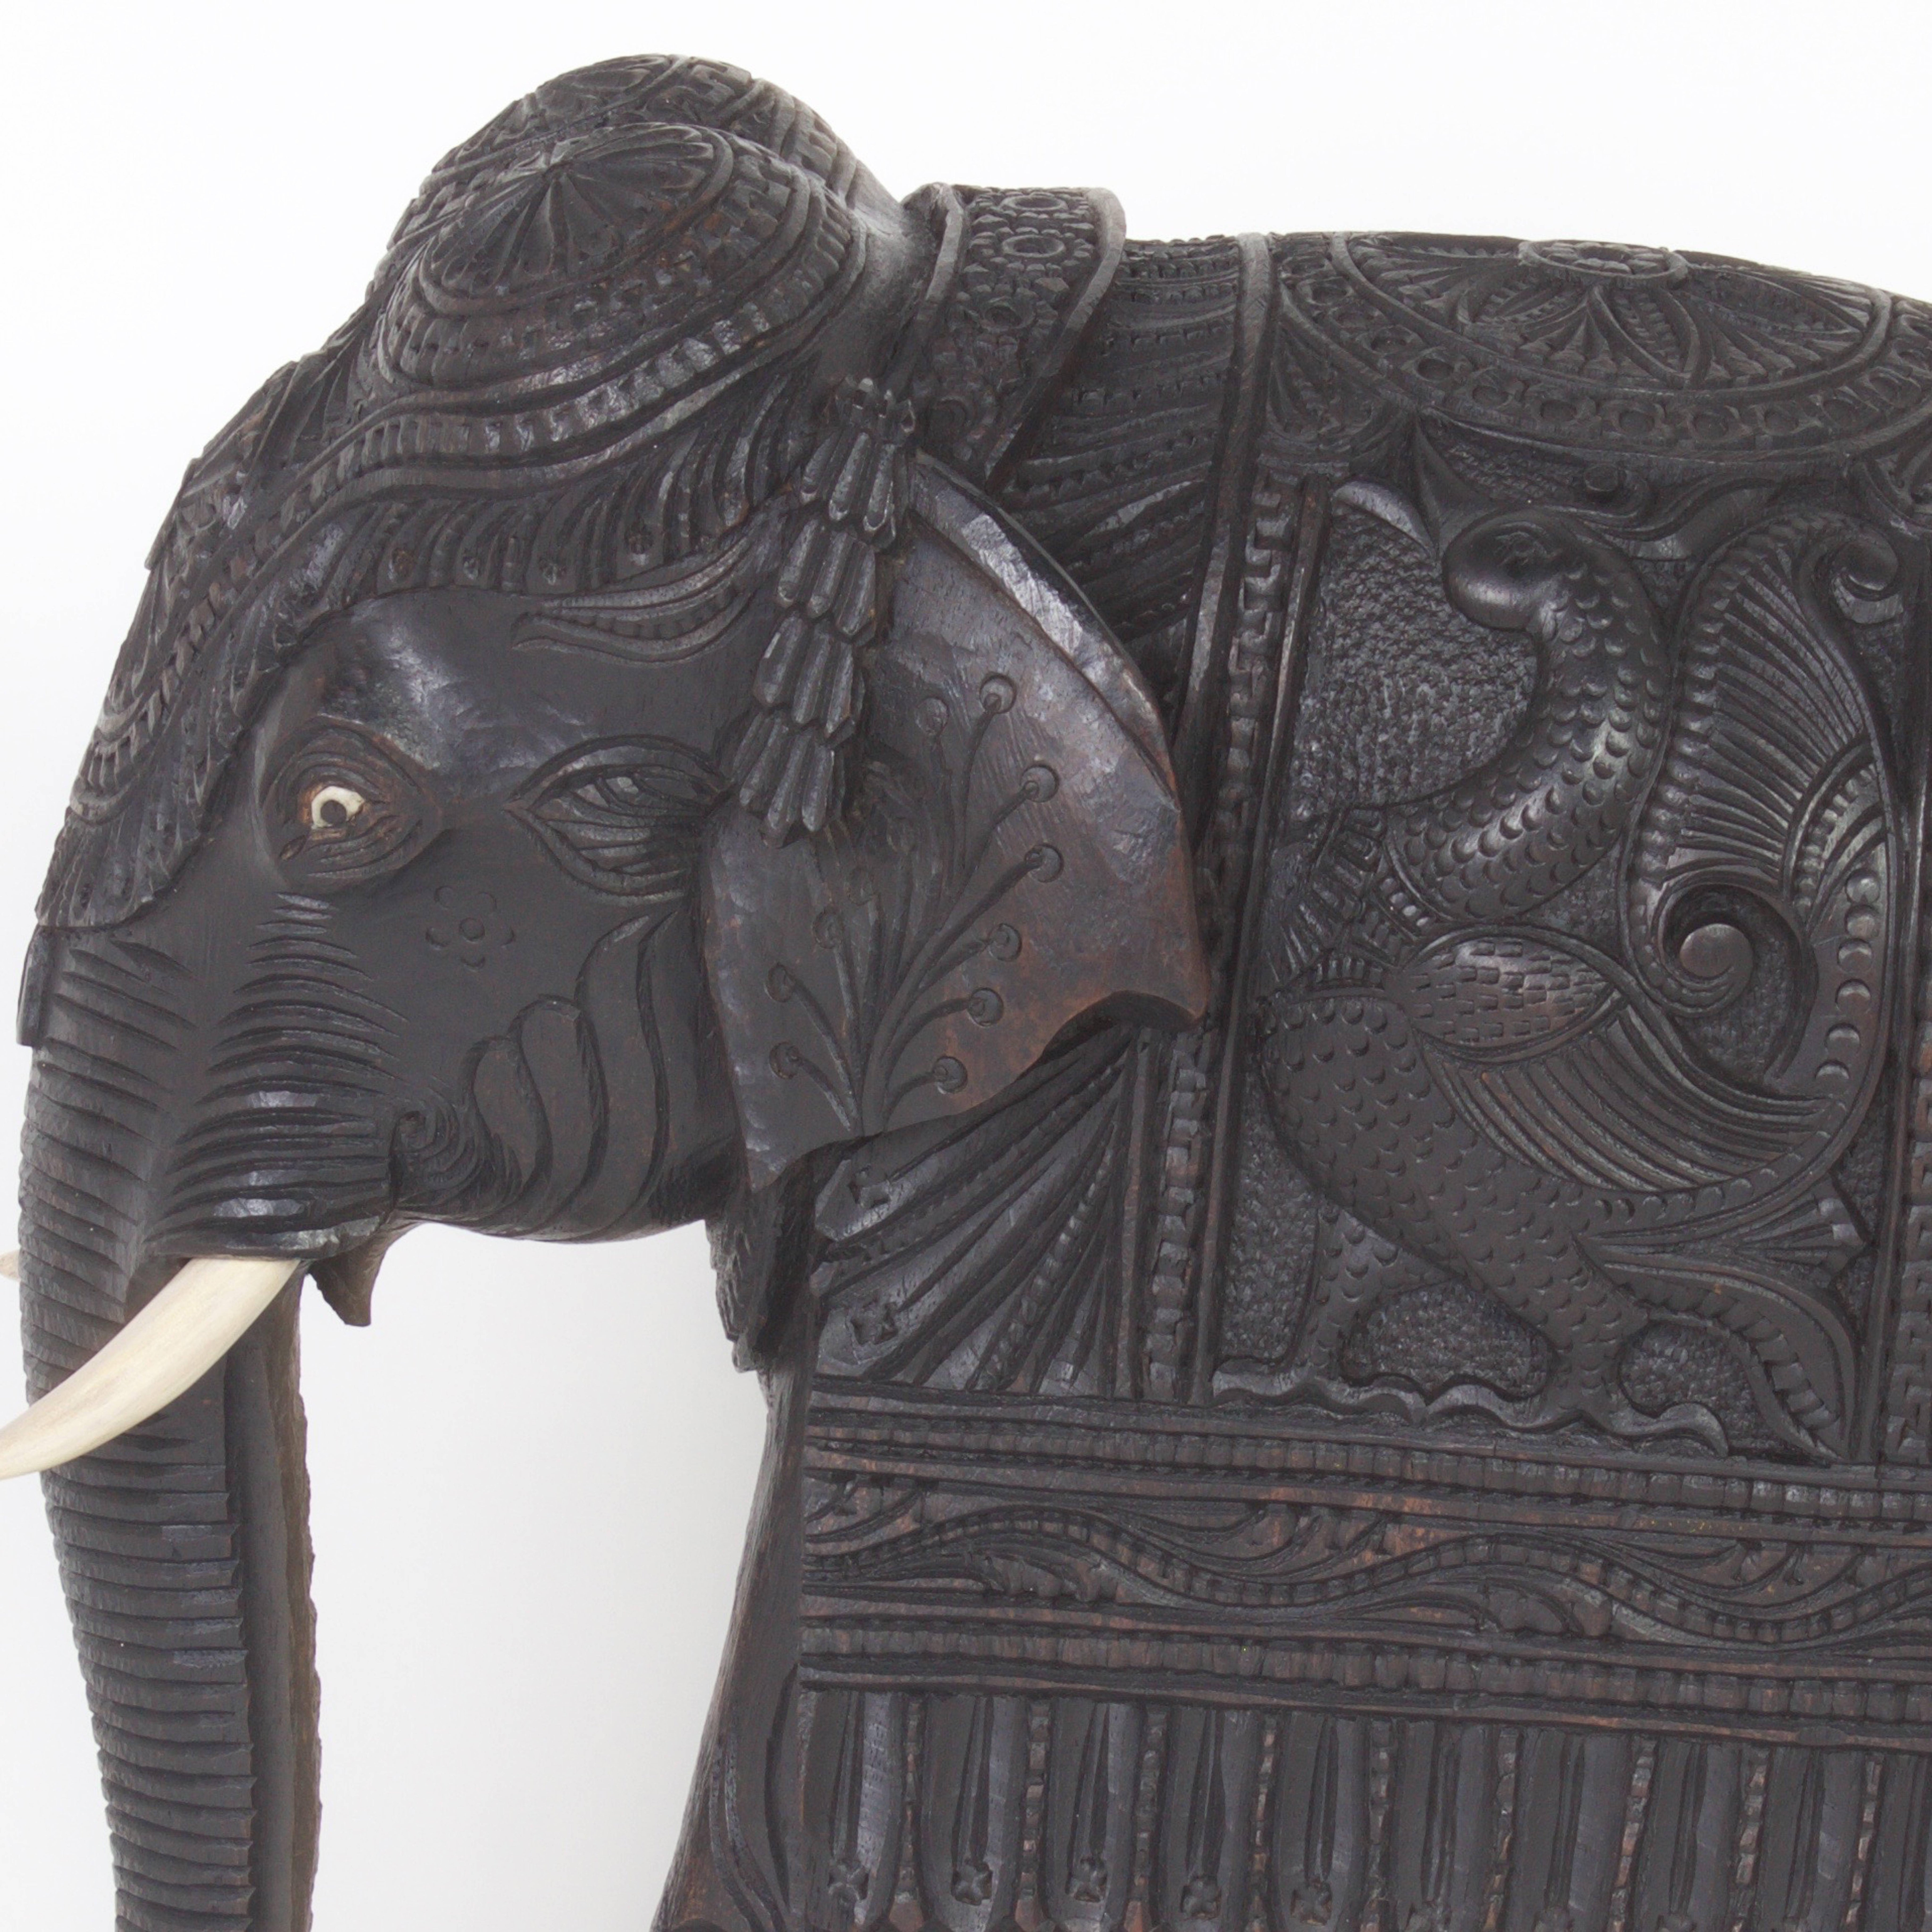 Antique Carved Anglo-Indian Elephant Figure 1